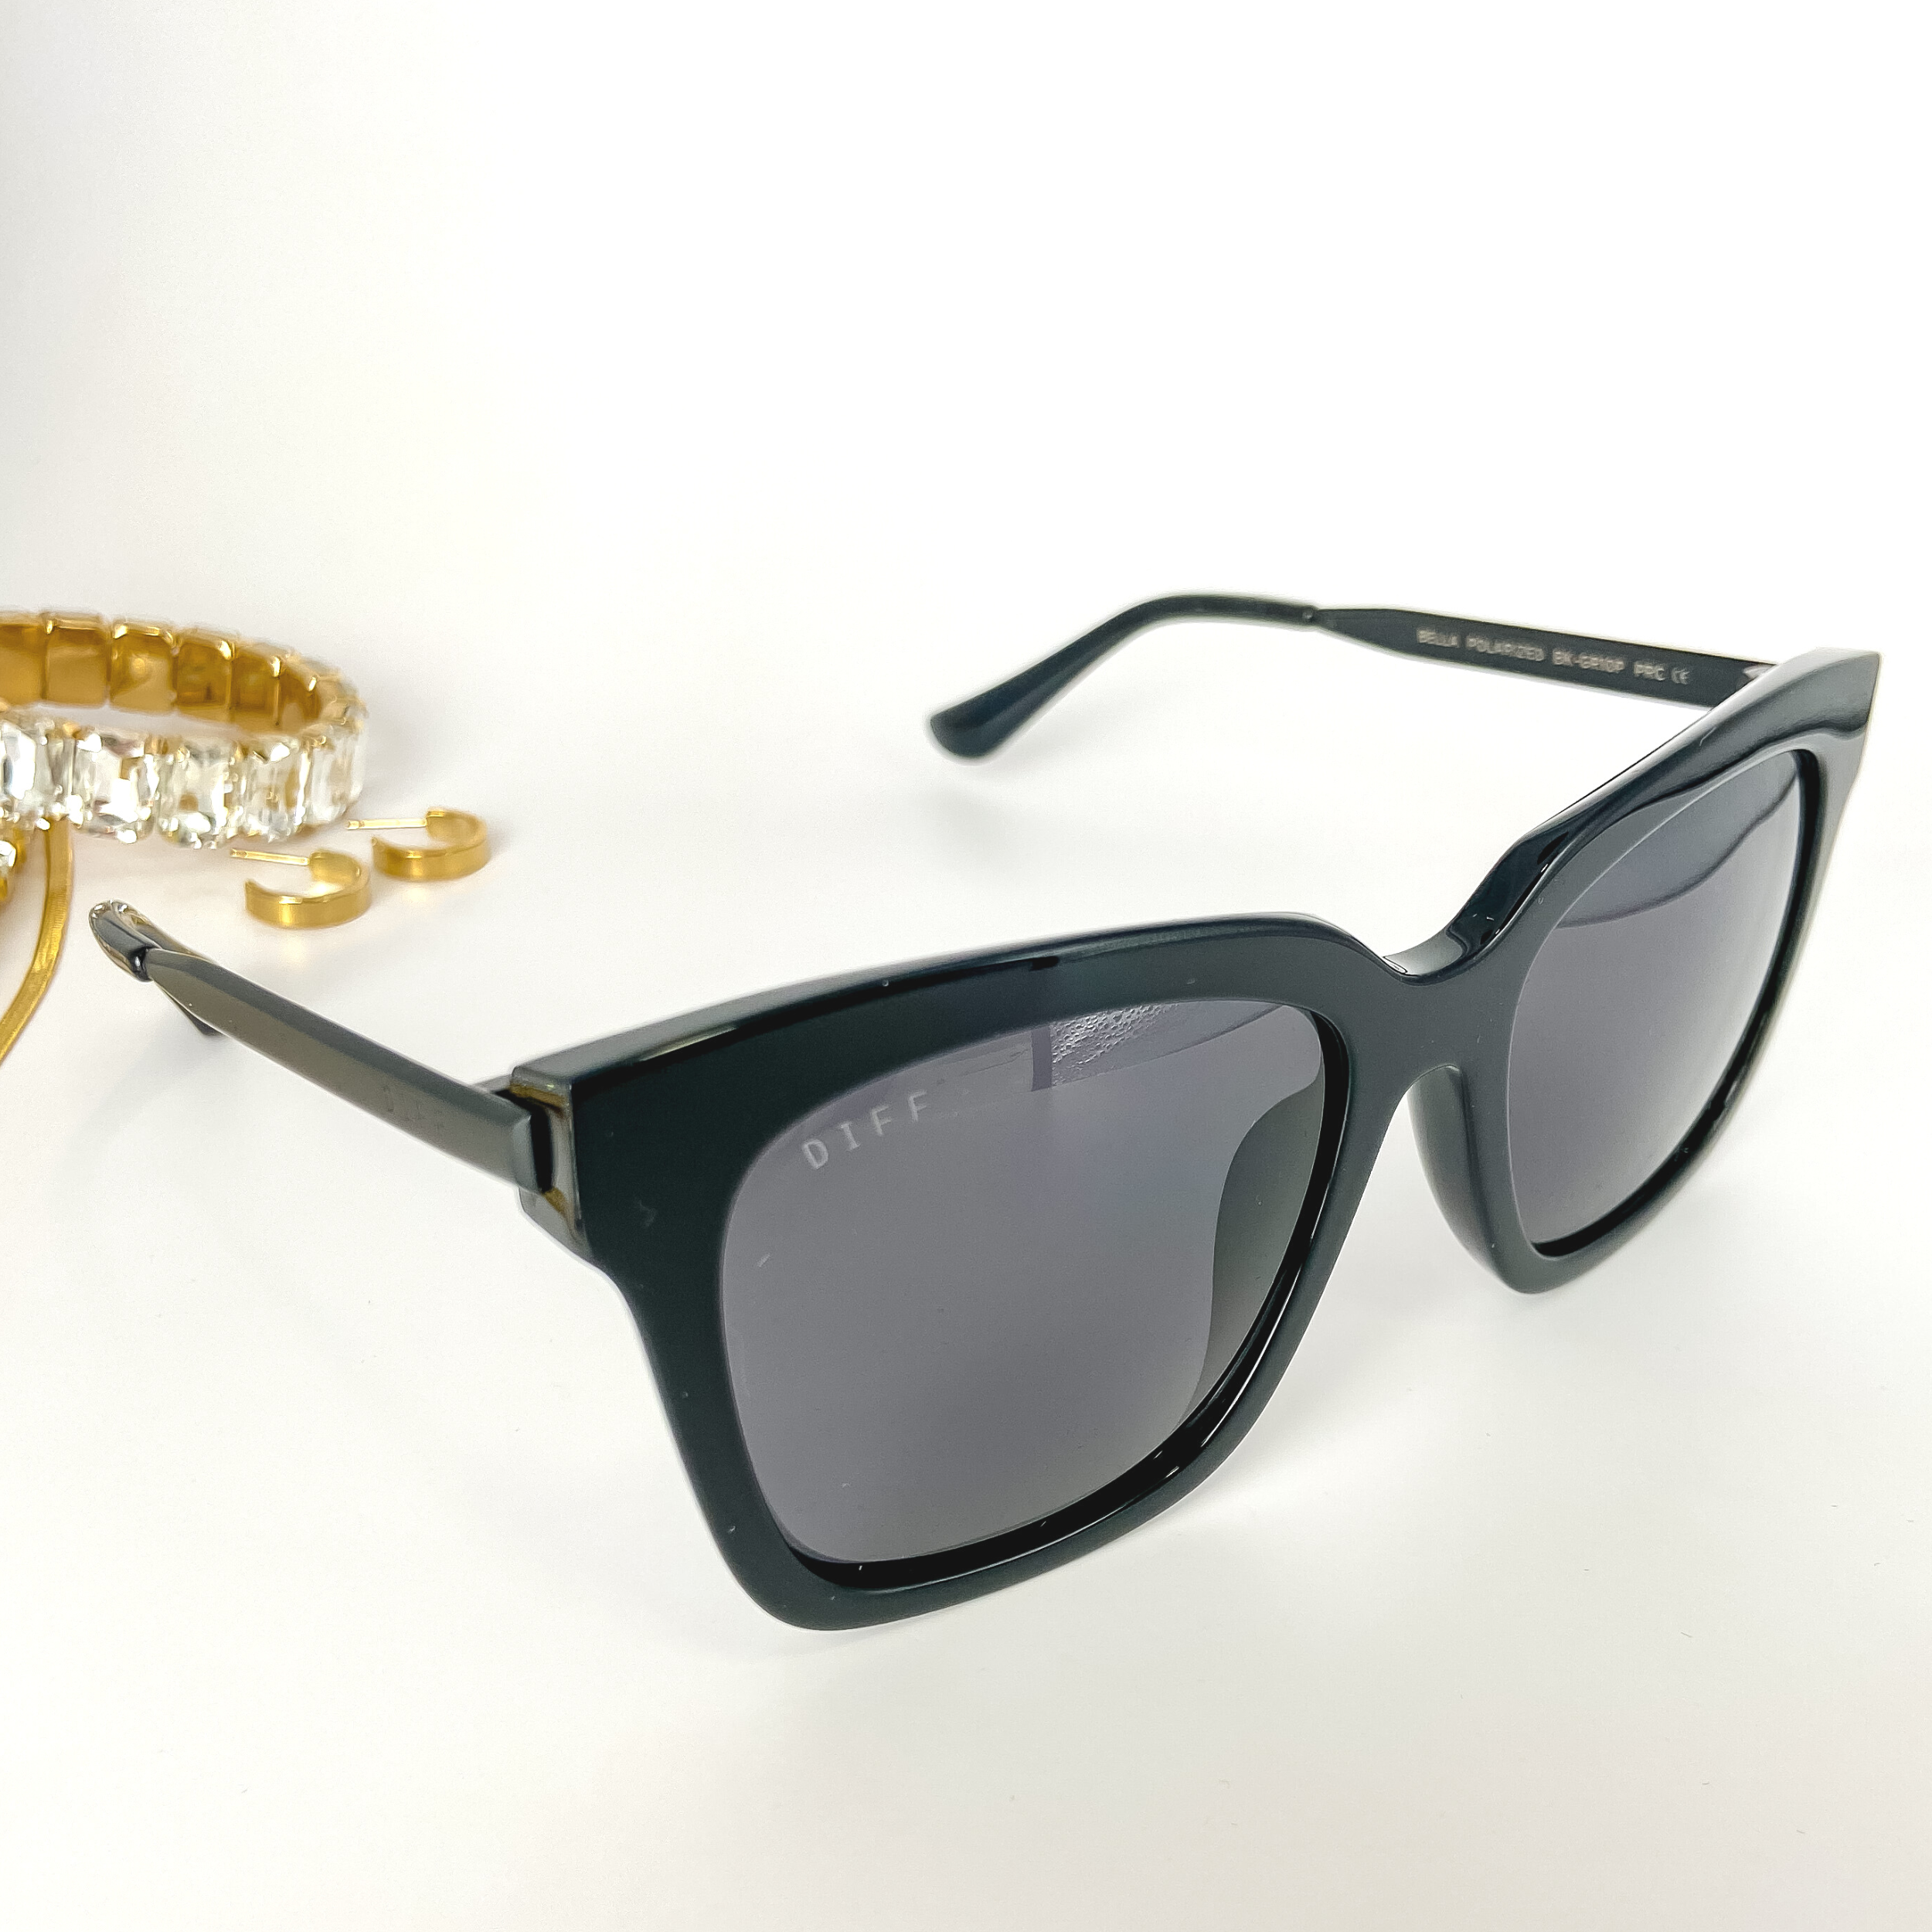 A pair of black square sunglasses with black lenses pictured open on a white background with gold jewelry.